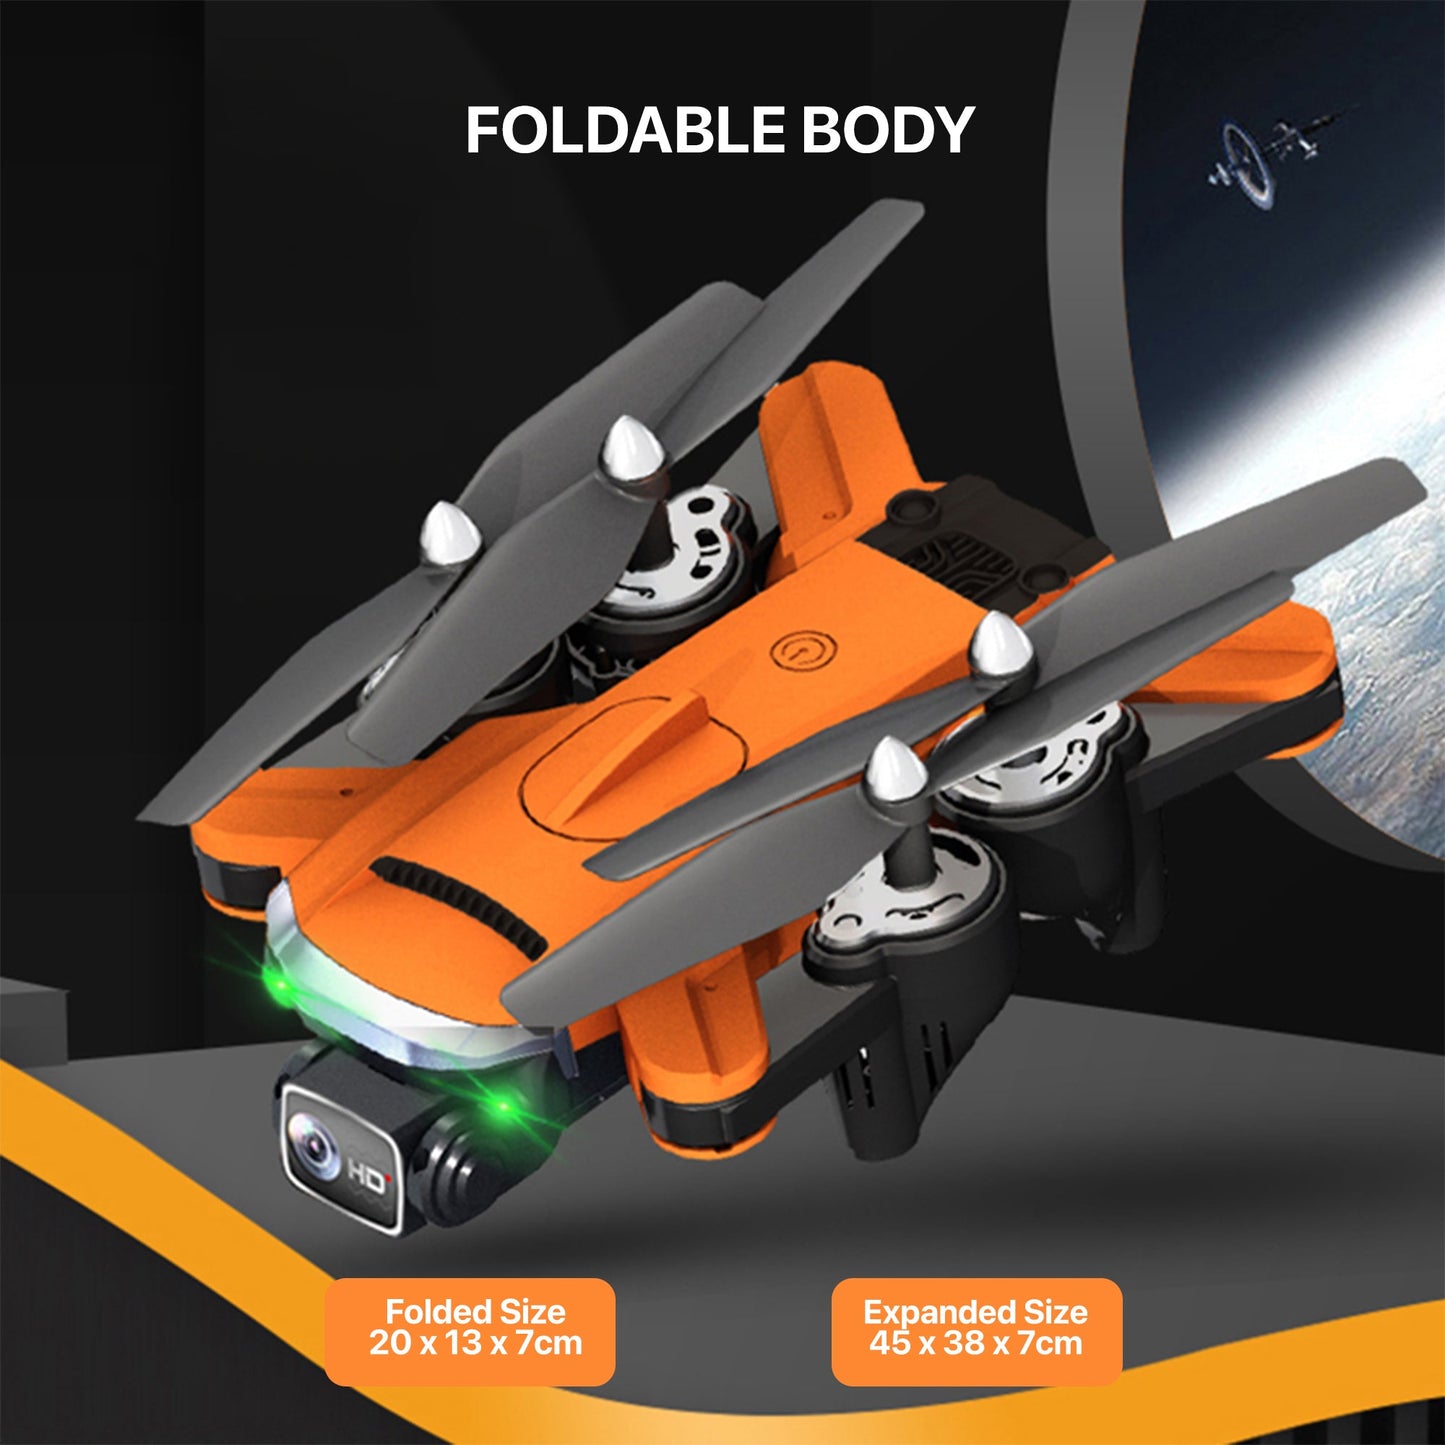 REFURBISHED: The Bigly Brothers Mark V Extremis Orange 4k Drone with Camera, 360 Degrees of Obstacle Avoidance, Brushless Motors, 2 Batteries Included, Below 249 Grams, with Carrying Case, NO ASSEMBLY REQUIRED Ready to Fly!